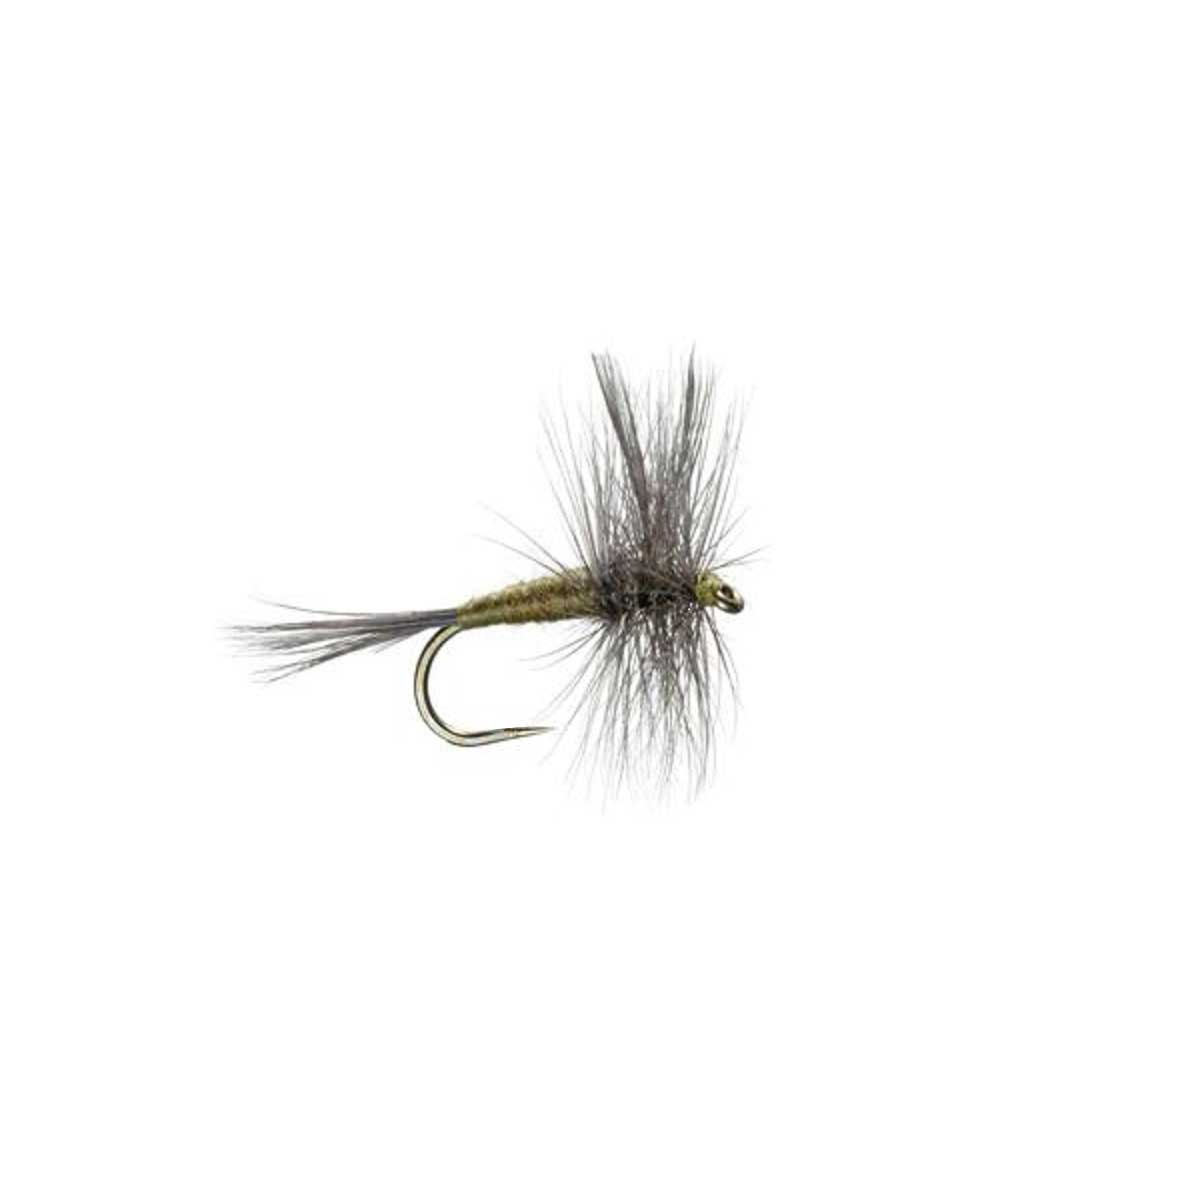 Barbless Blue Winged Olive BWO Classic Trout Dry Fly Fishing Flies - Set of 6 Flies Size 18